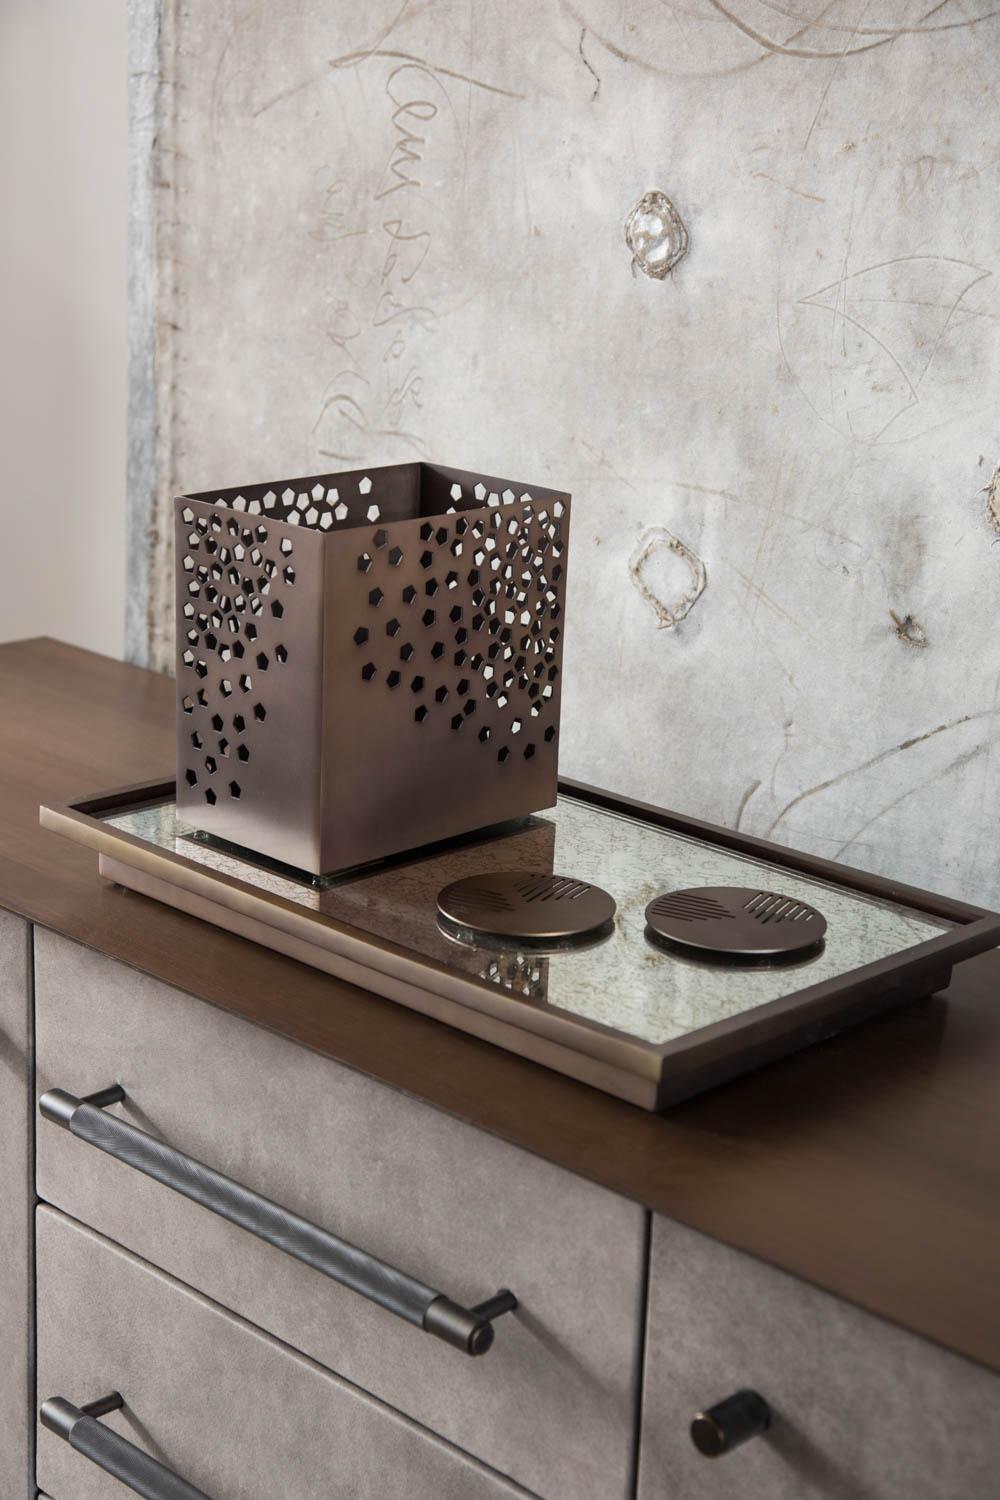 Style with functionality is one of the key elements of CASA BOTELHO’s design ethos. While every object has to add glamour and sensuality to a space, it also has to be versatile and have purpose. The Vulcano tray is the perfect example of this